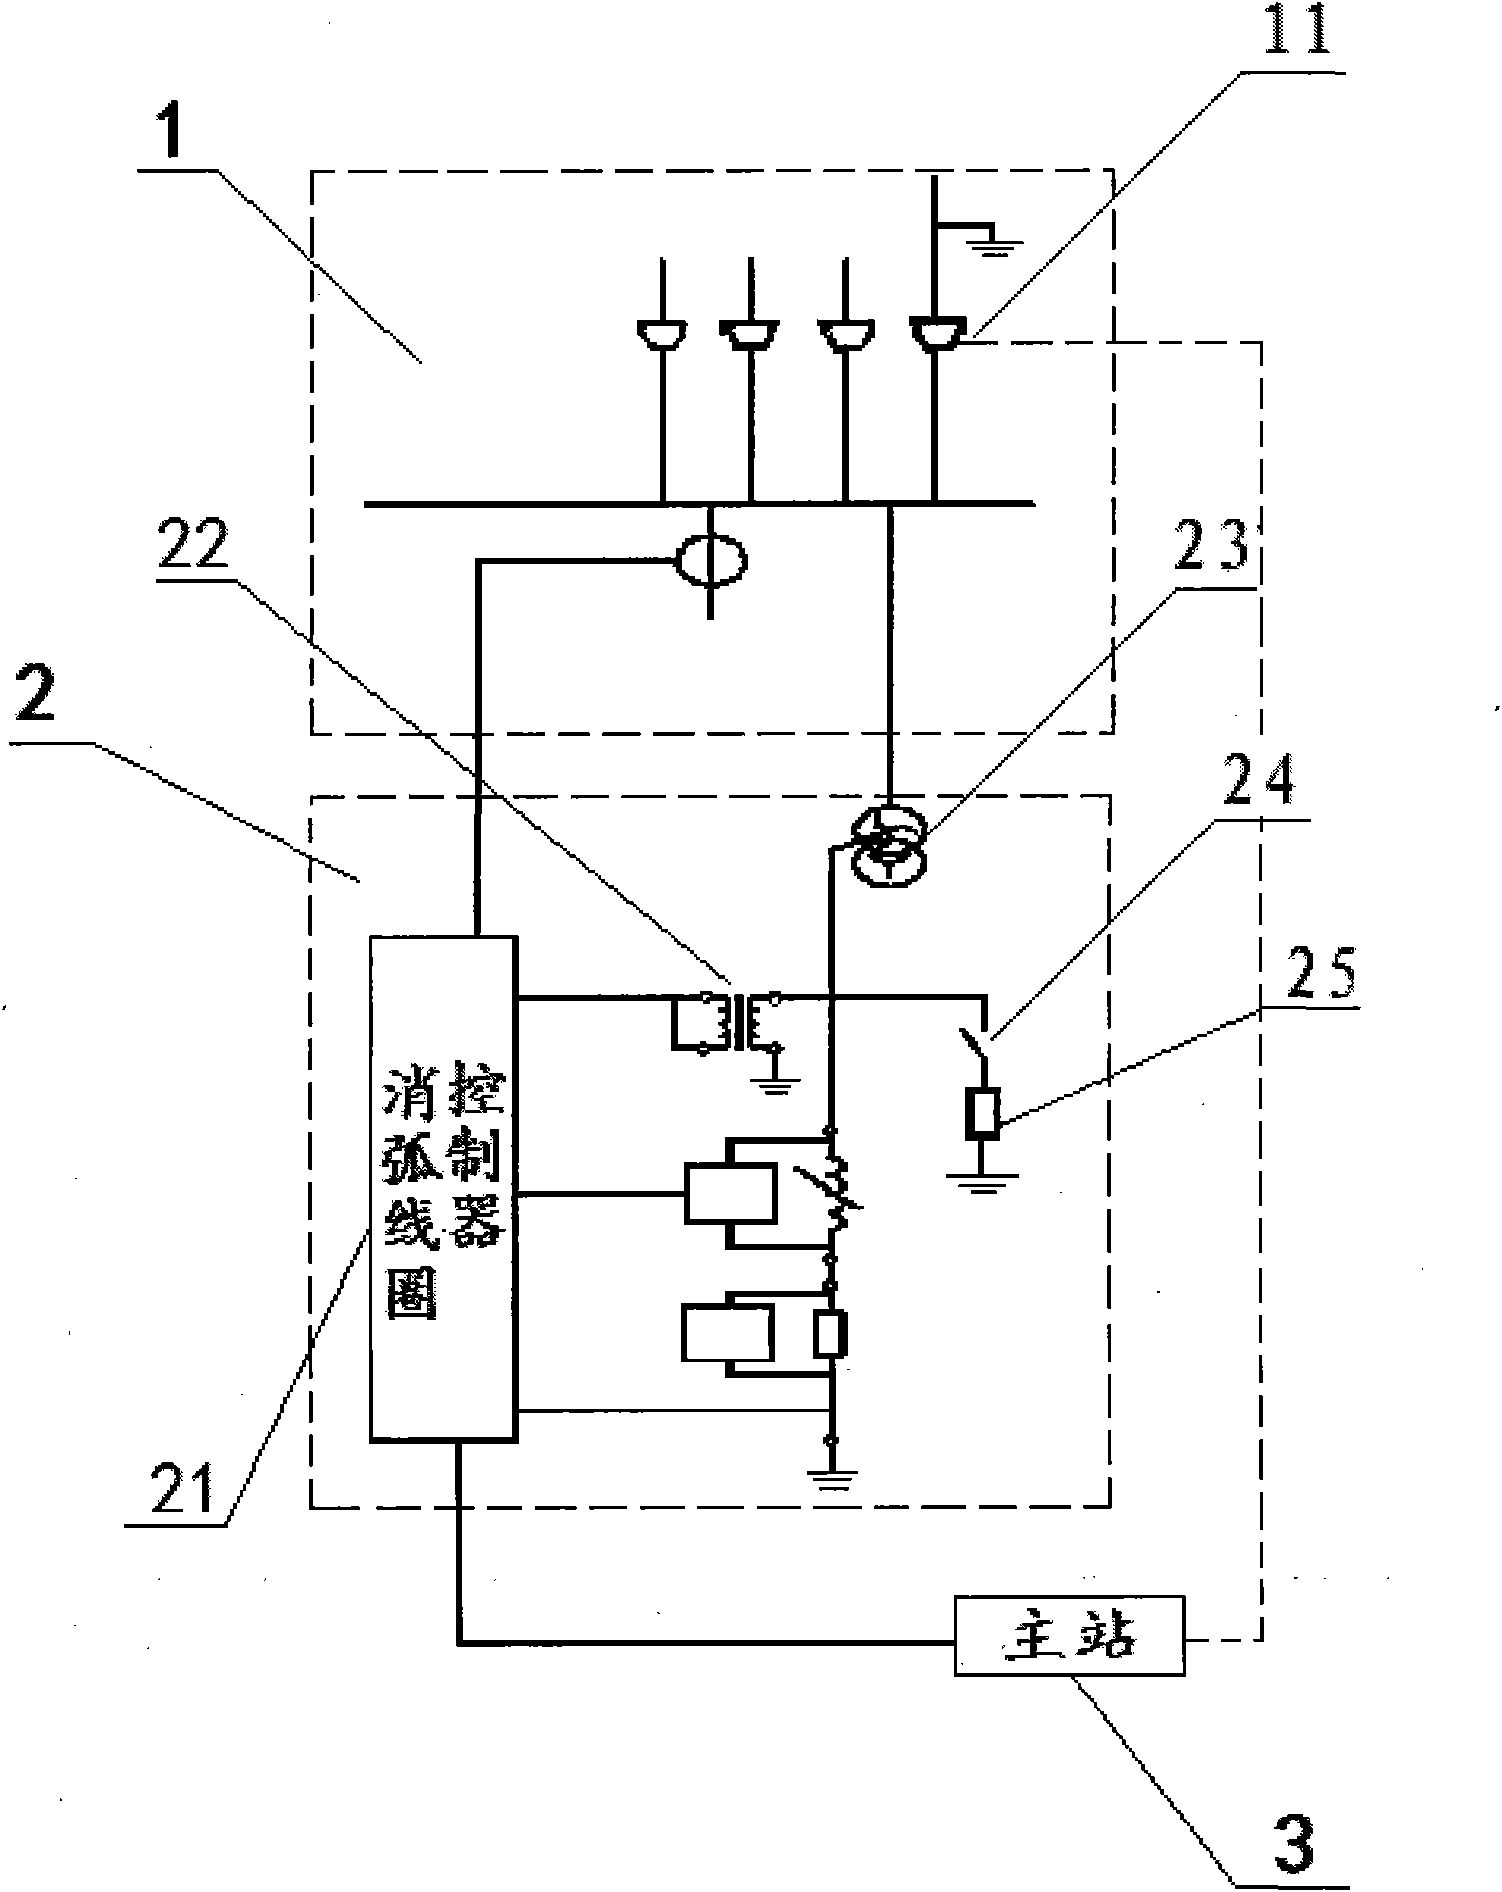 Method for locating single phase ground fault locating system